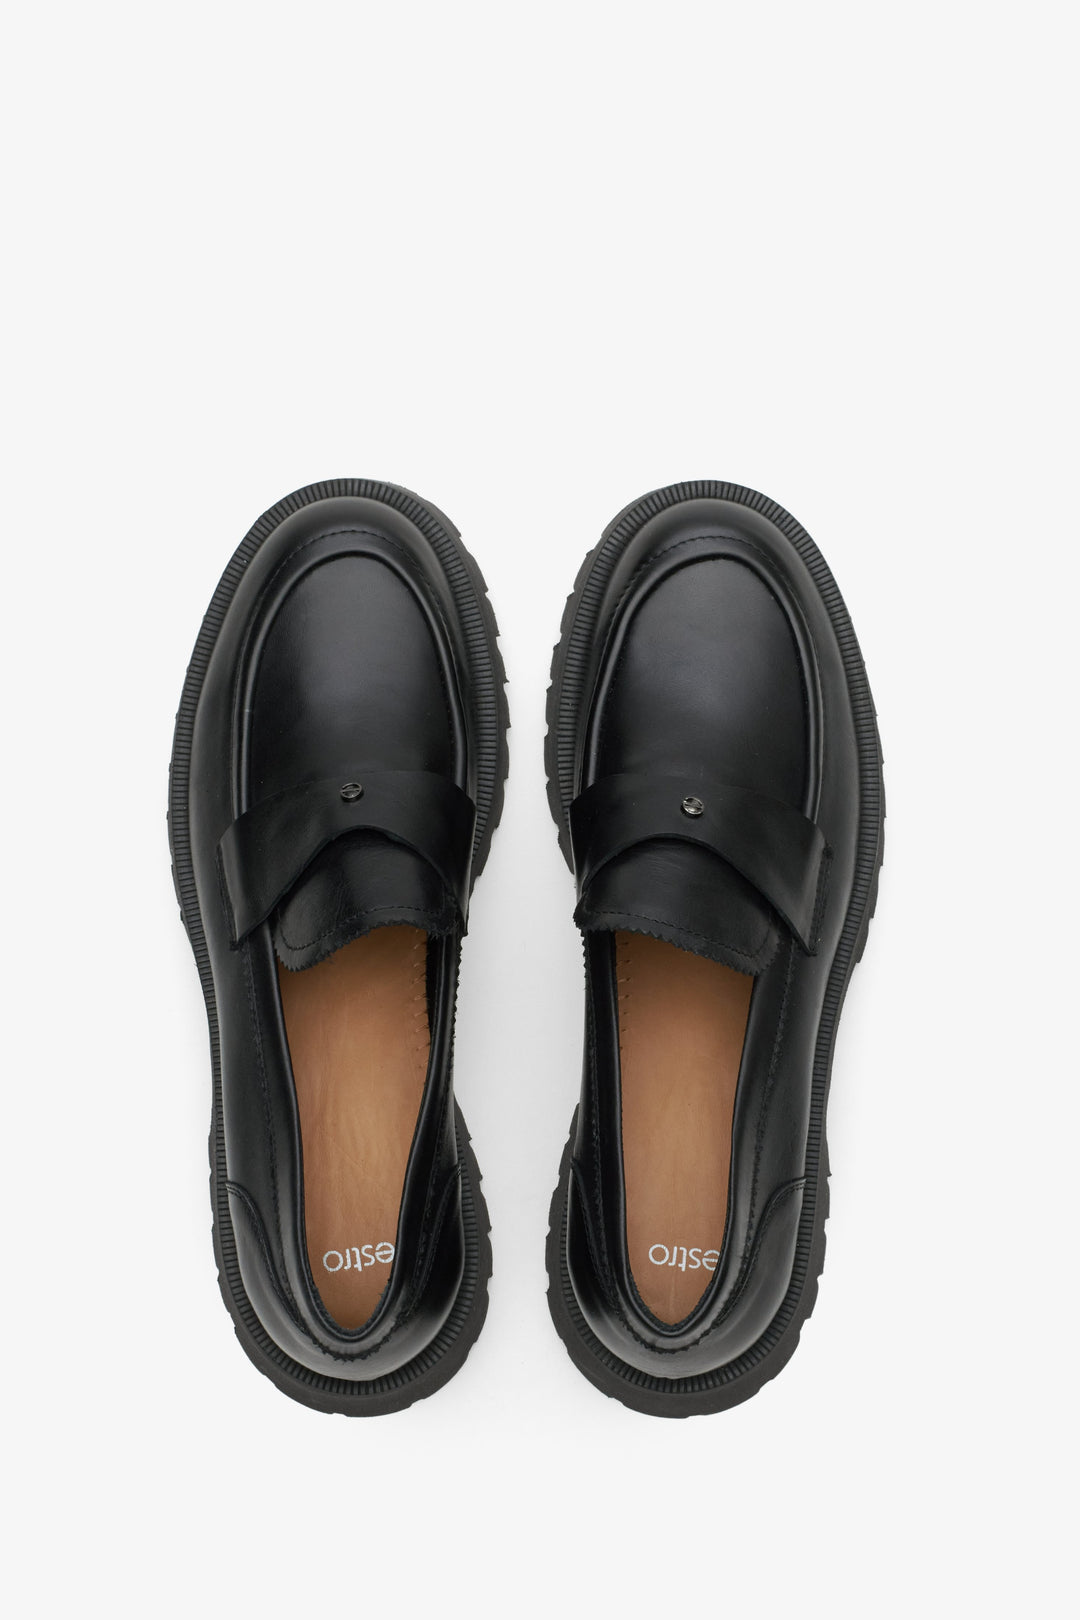 Women's black leather loafers by Estro.